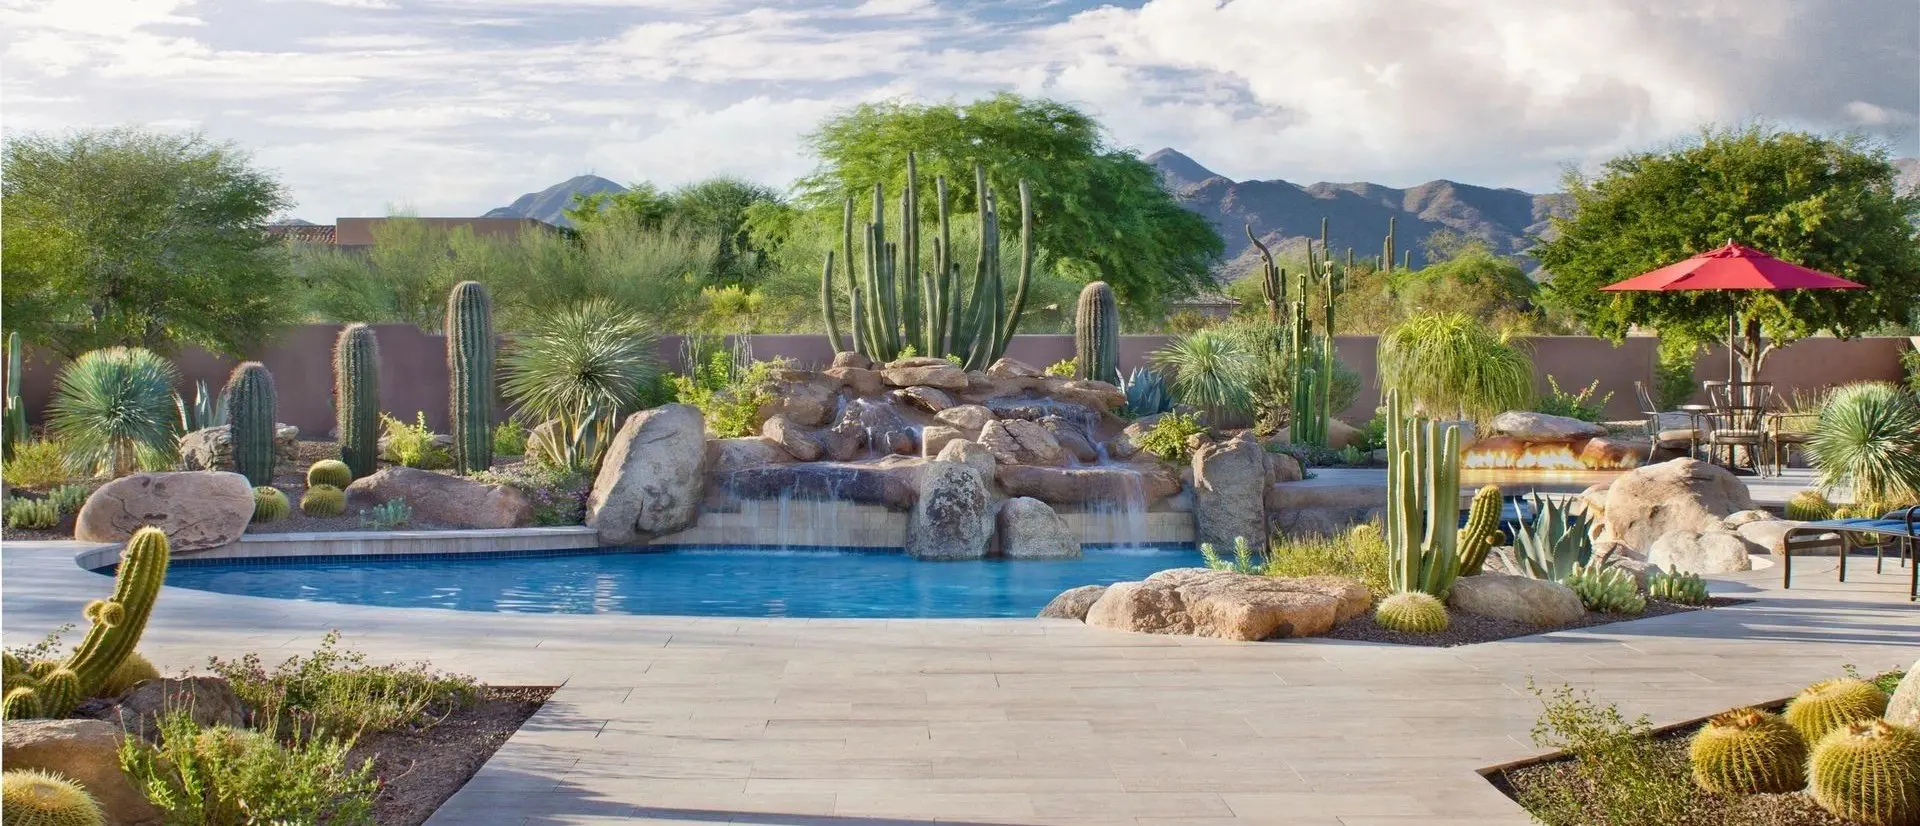 A pool with a waterfall and cactus in the background.